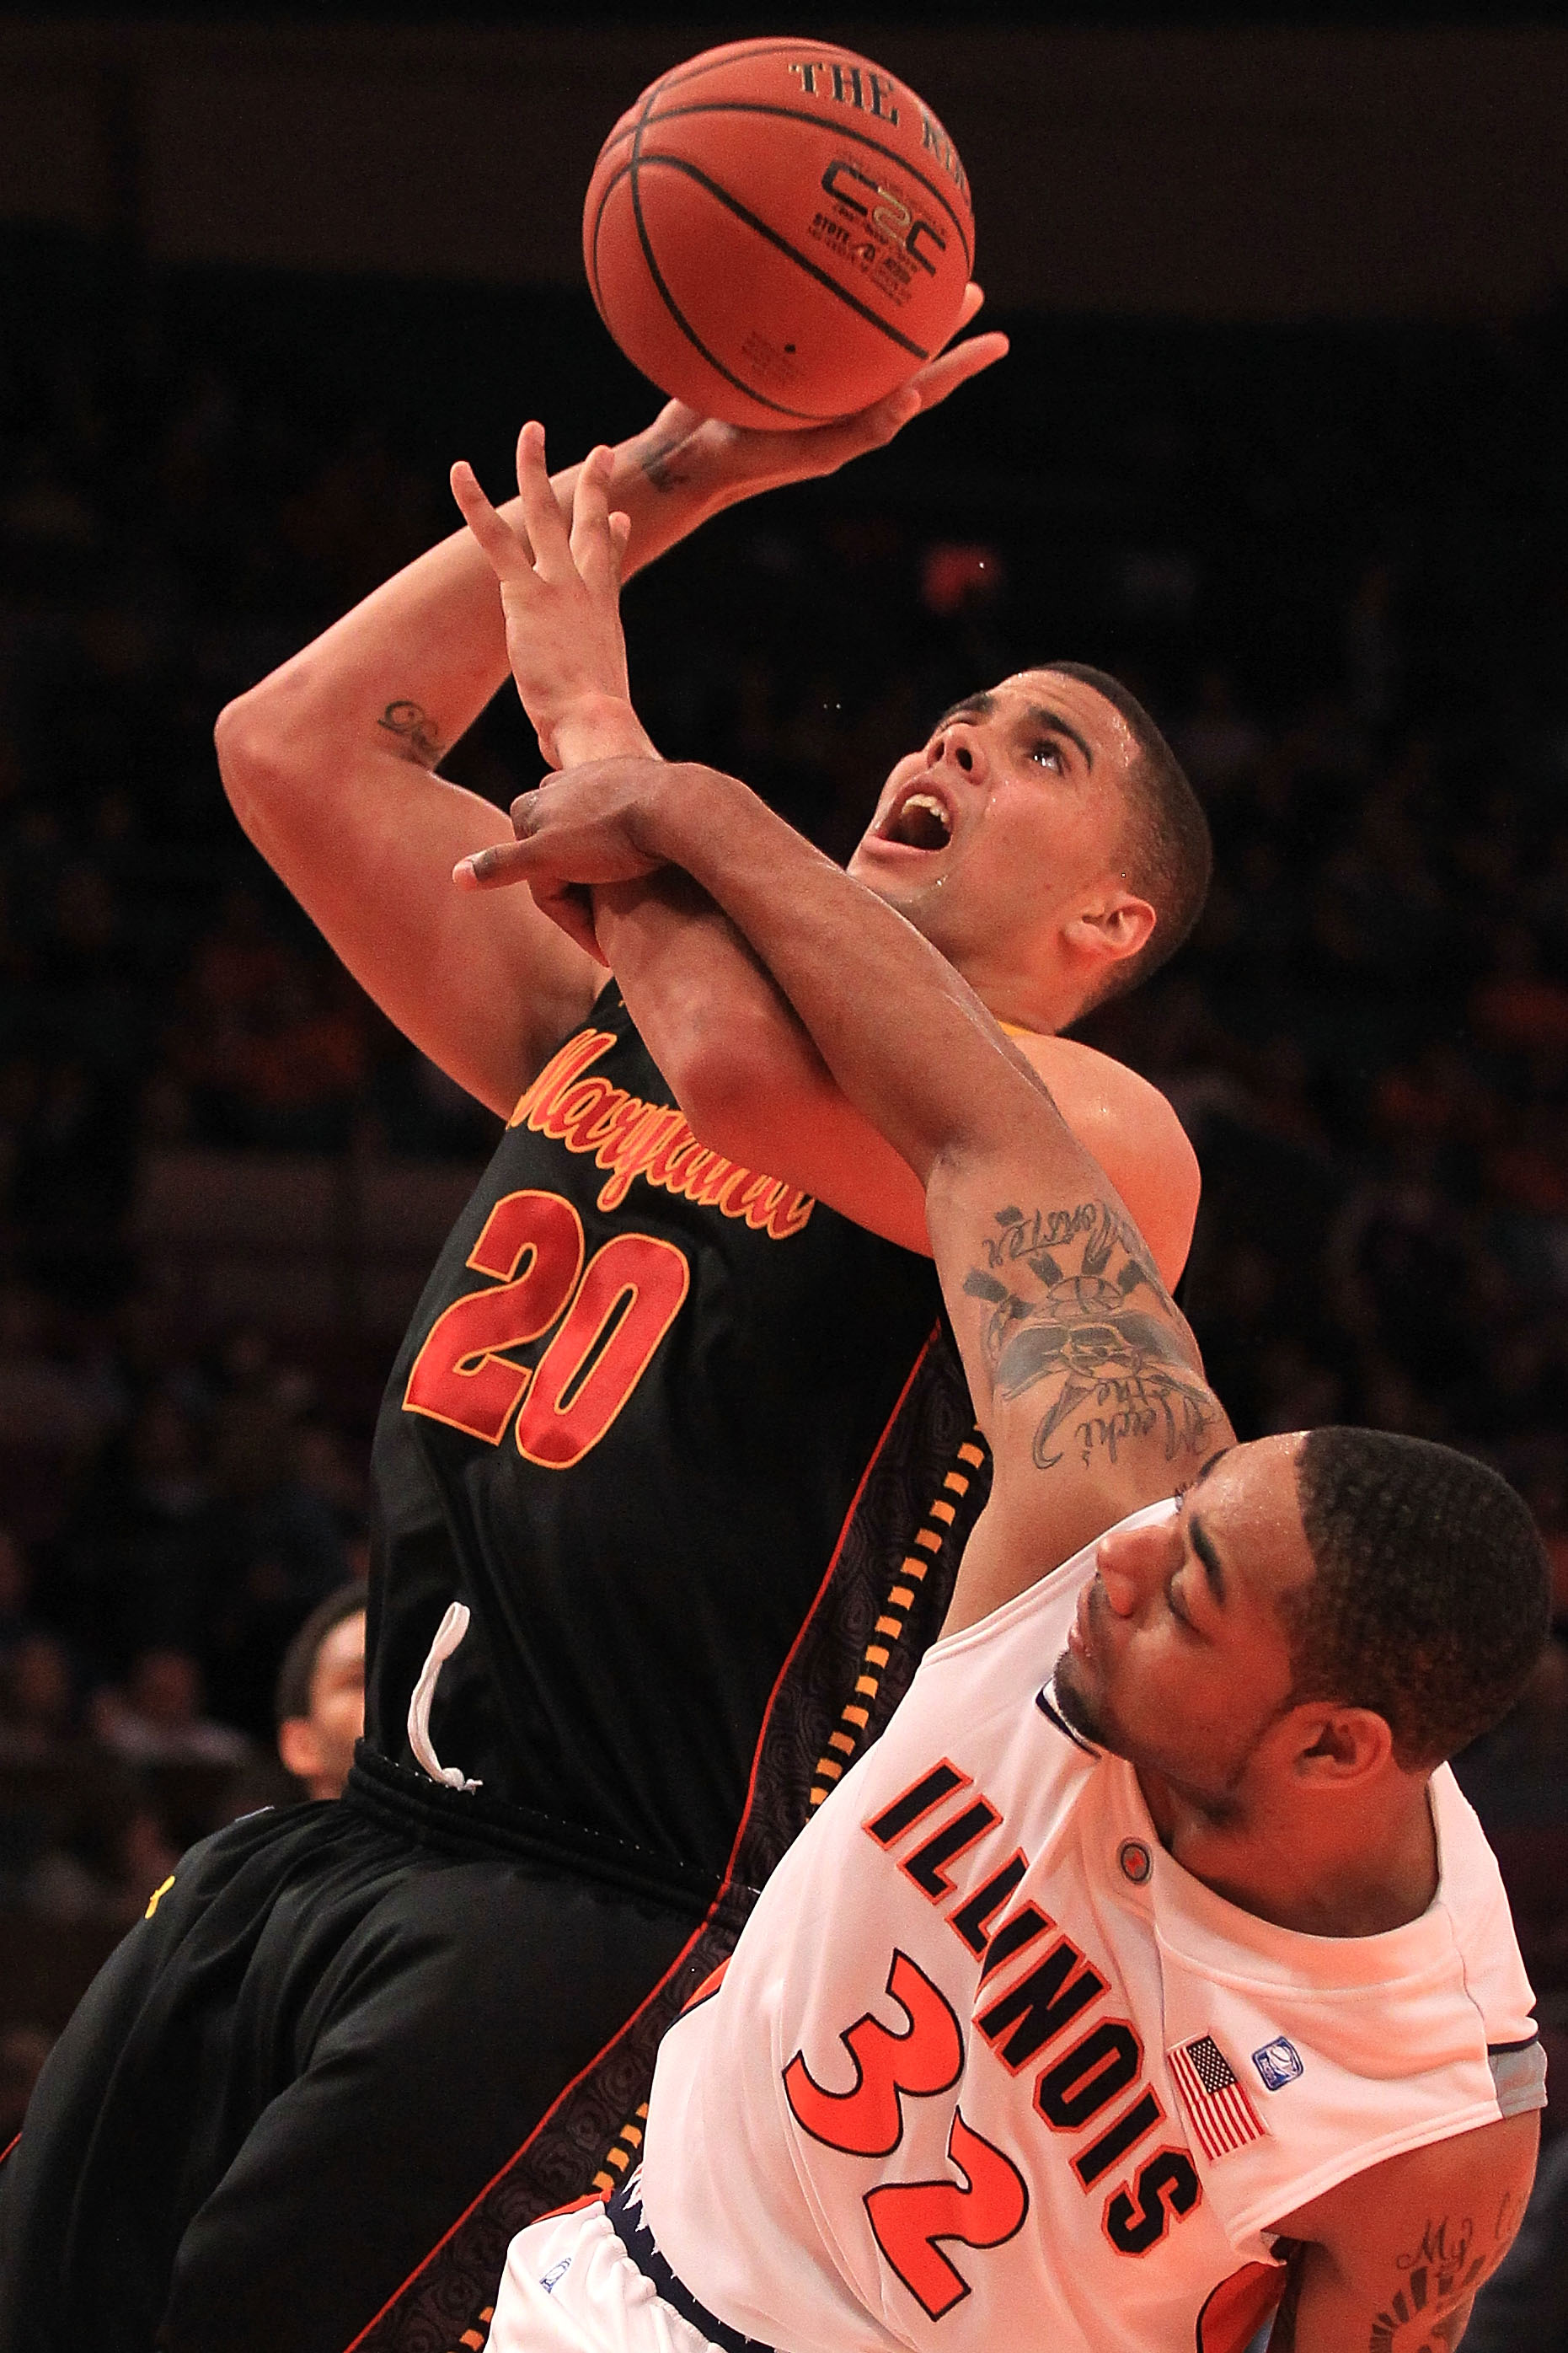 NEW YORK - NOVEMBER 19:  Jordan Williams #20 of the Maryland Terrapins is fouled by Demetri McCamey #32 of the Illinois Fighting Illini during the 2k Sports Classic at Madison Square Garden on November 19, 2010 in New York, New York.  (Photo by Chris McGr